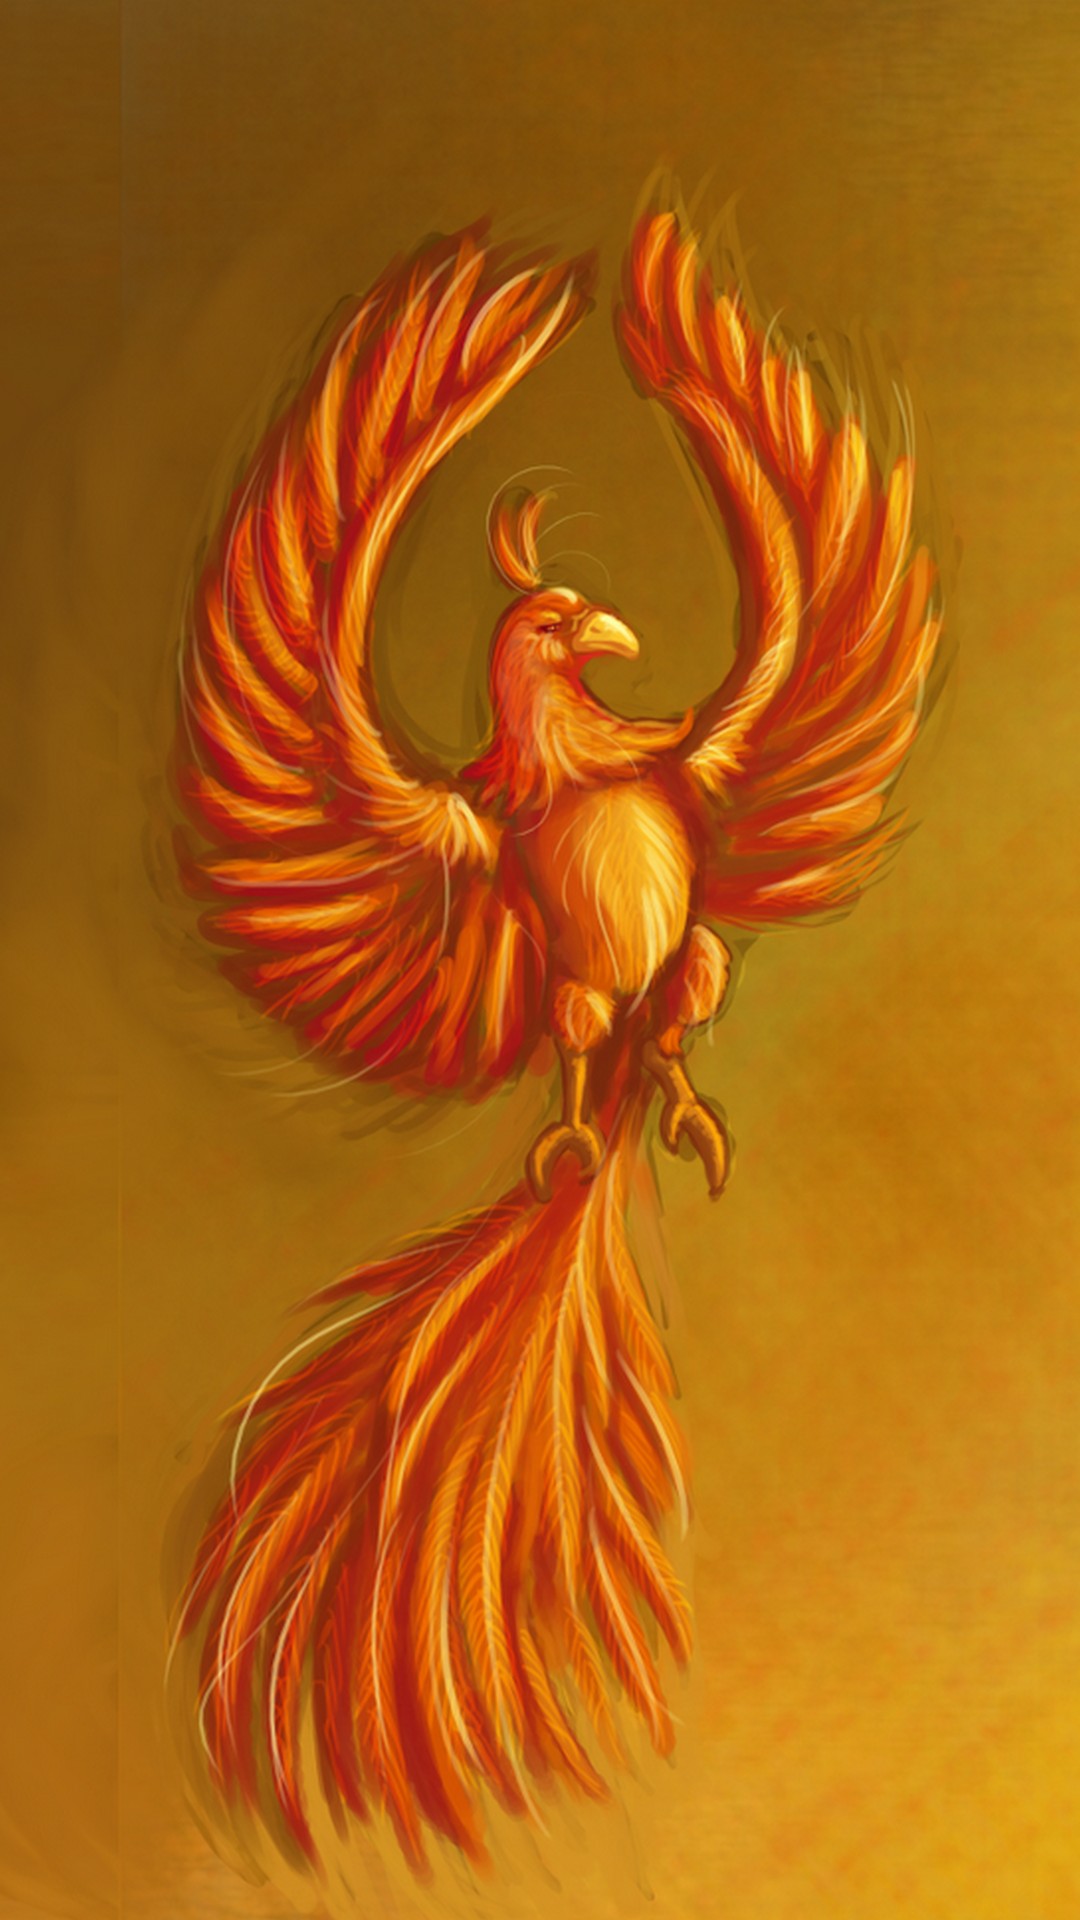 Phoenix Bird Android Wallpaper with image resolution 1080x1920 pixel. You can make this wallpaper for your Android backgrounds, Tablet, Smartphones Screensavers and Mobile Phone Lock Screen